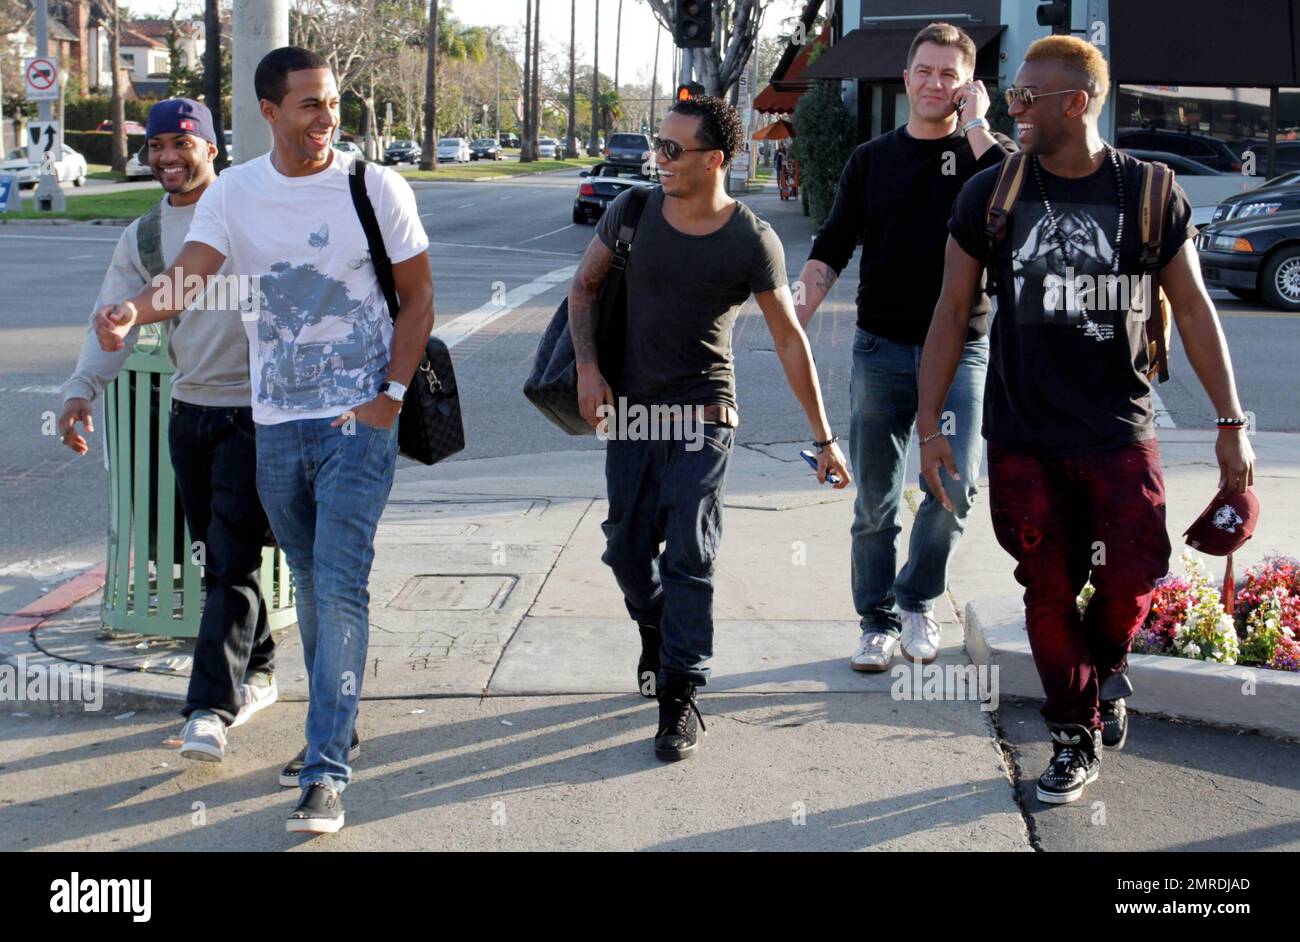 EXCLUSIVE!! A day after their arrival in Los Angeles the JLS boys left  their hotel in matching Mustang muscle cars driven by themselves. They were  all smiles as they took a stroll